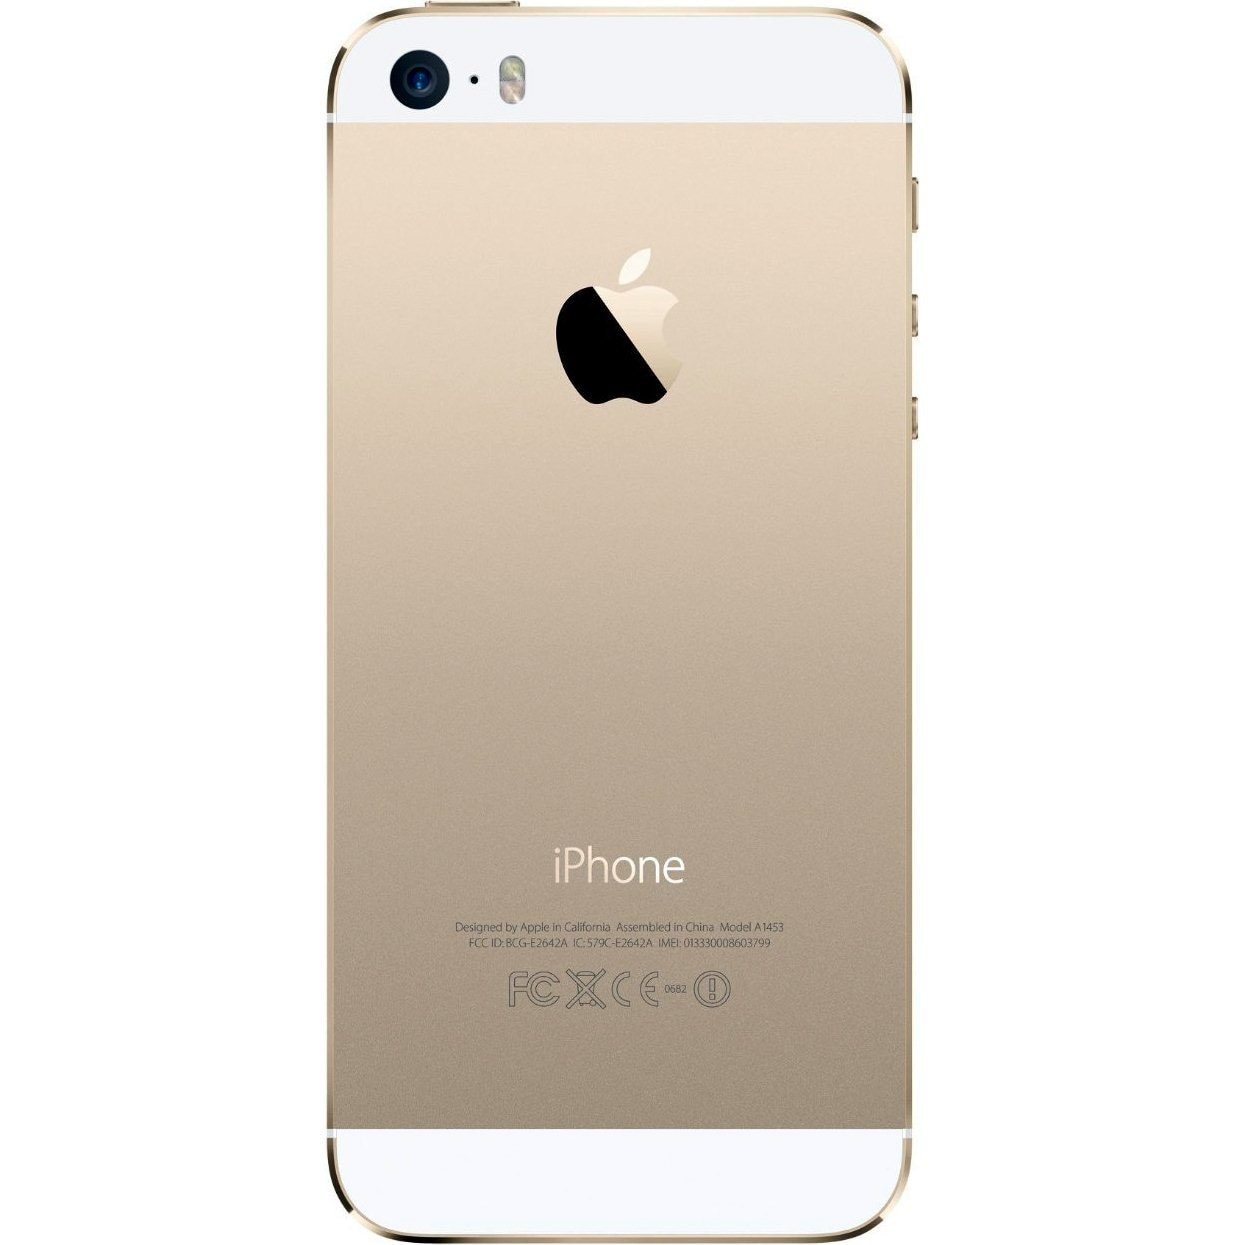 Conform Fearless engineering Telefon mobil Apple iPhone 5S, 16GB, Gold - eMAG.ro